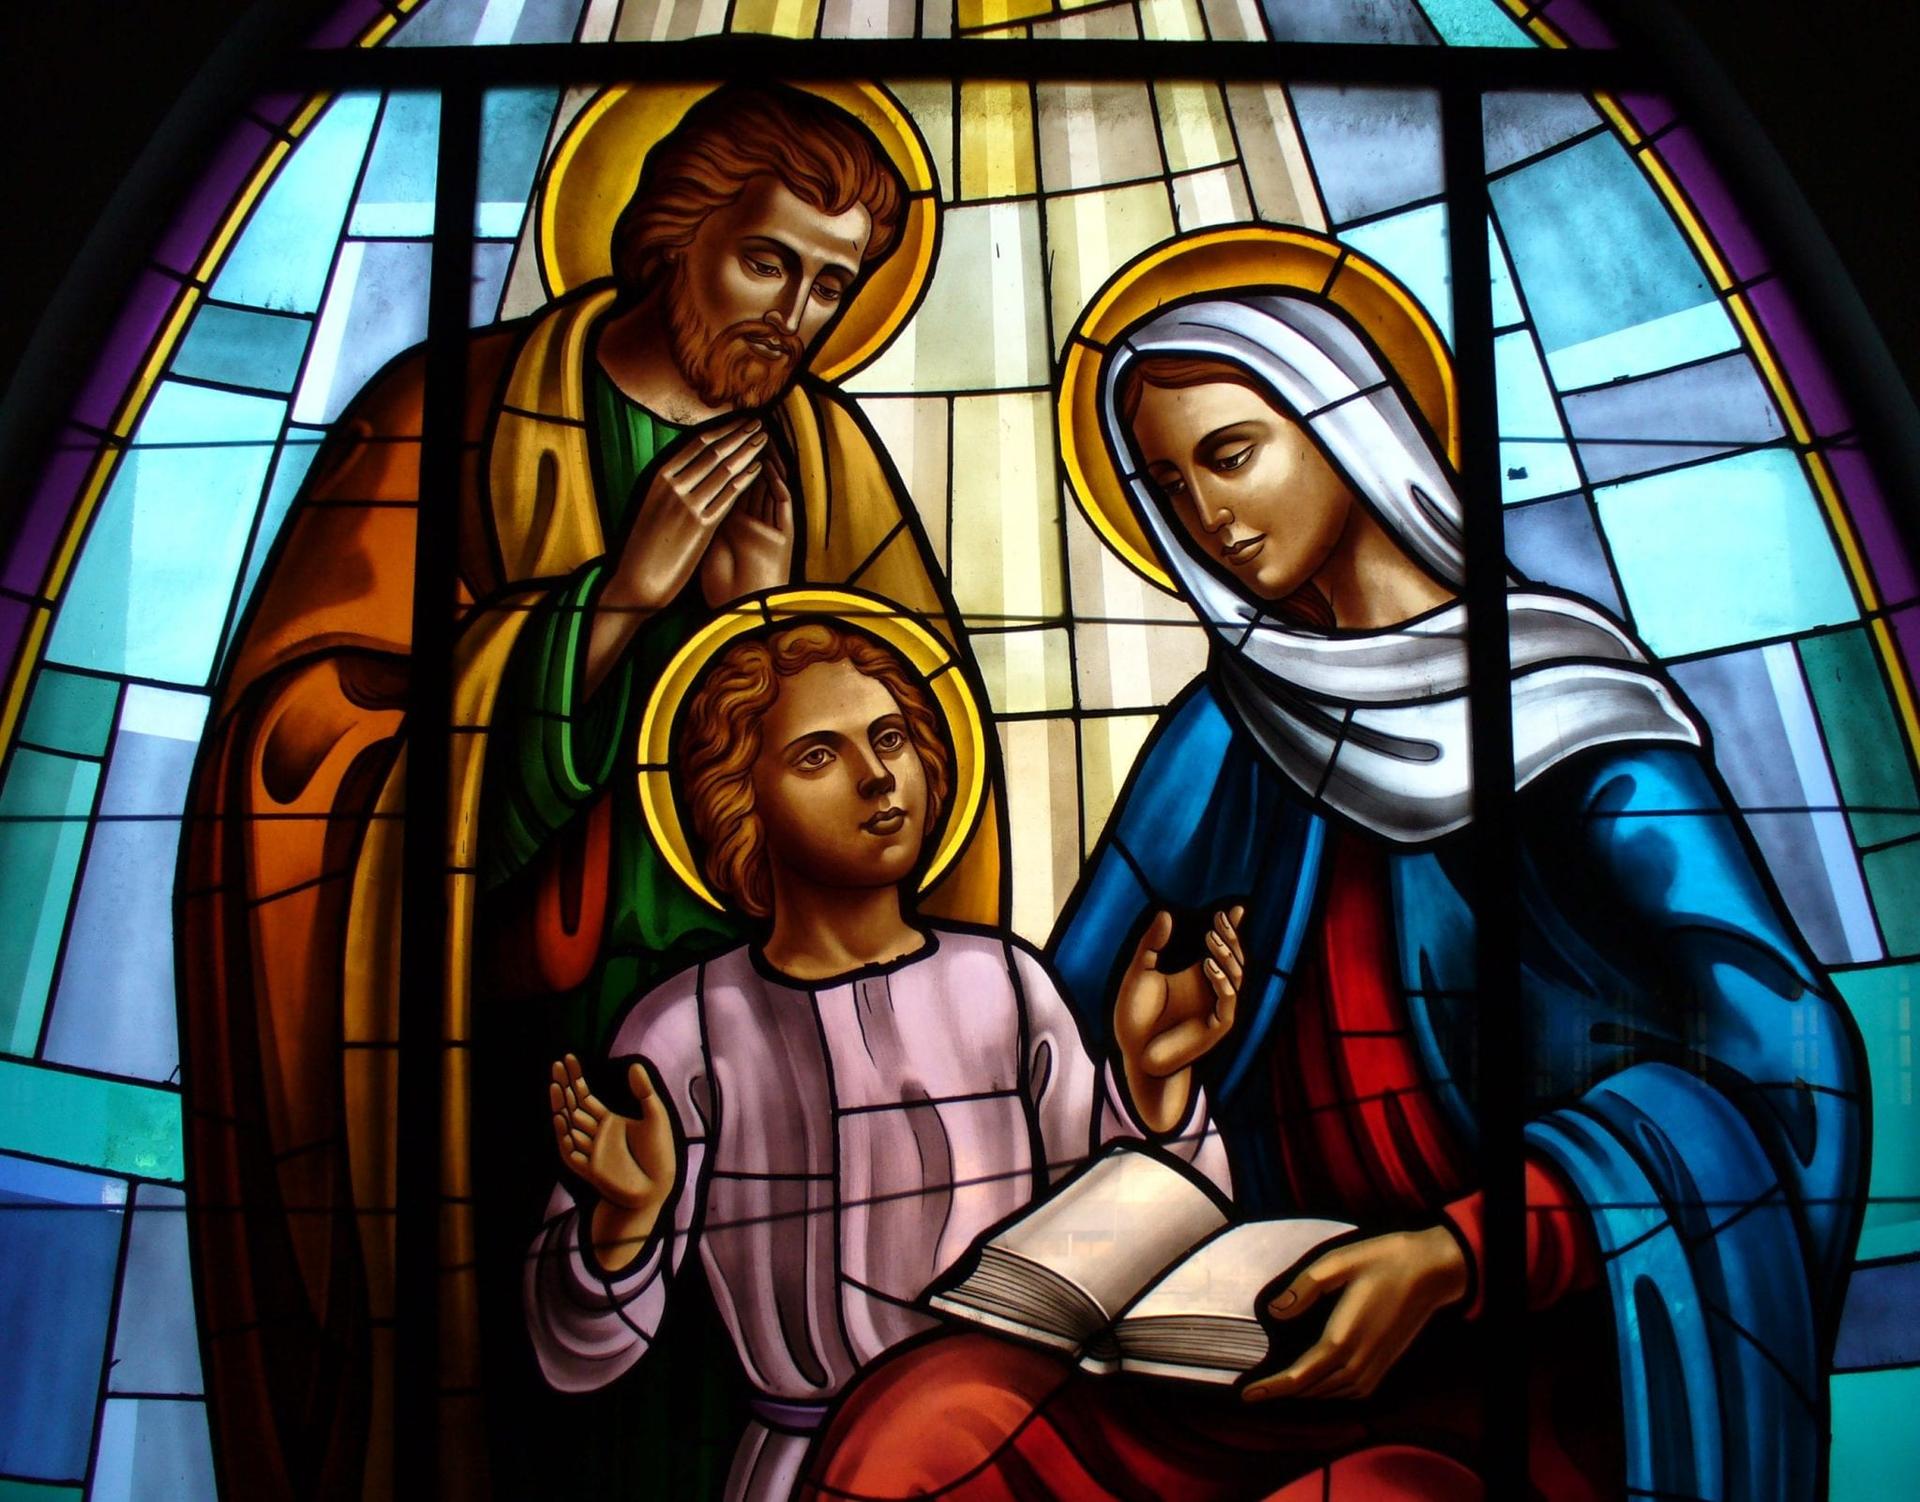 Holy Family’s income shouldn’t obscure the Lord’s call to simplicity